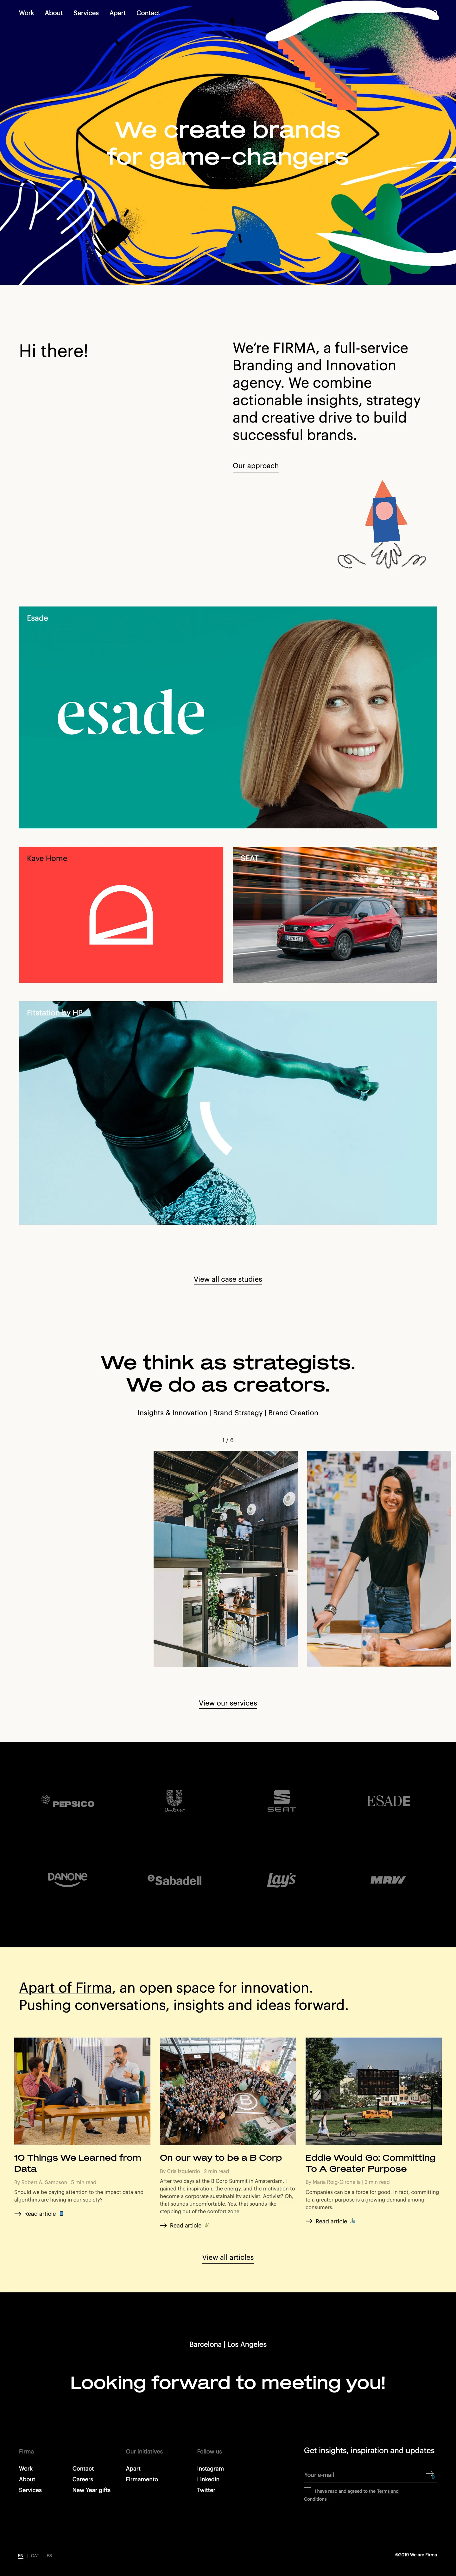 Firma Landing Page Example: We’re FIRMA, a full-service Branding and Innovation agency. We combine actionable insights, strategy and creative drive to build successful brands.